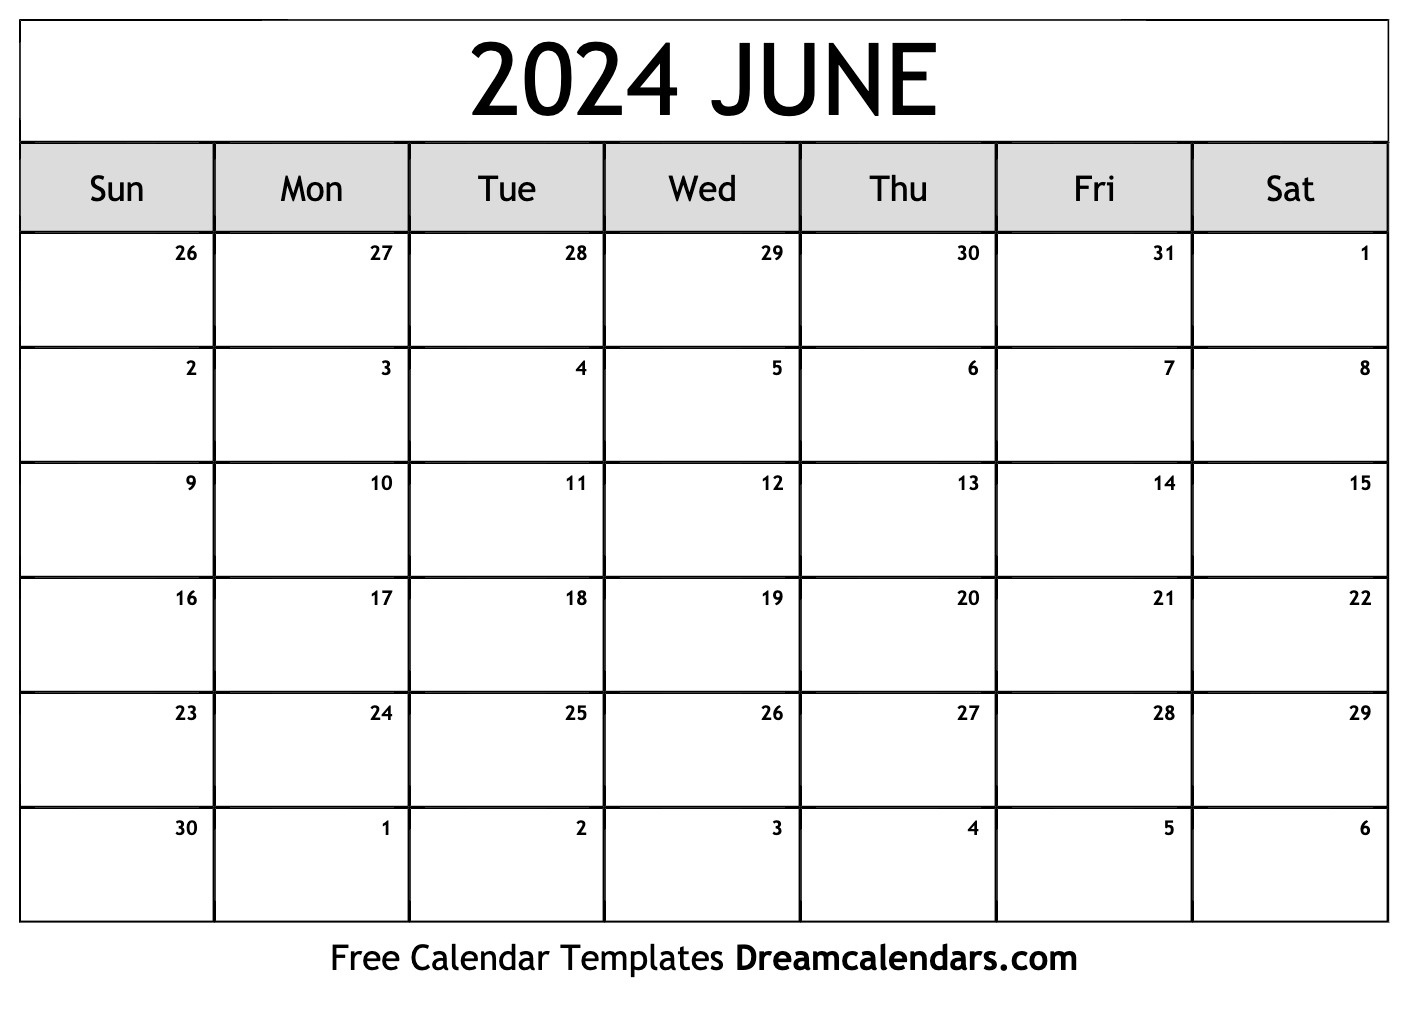 June 2024 Calendar - Free Printable With Holidays And Observances with June 5 2024 Calendar